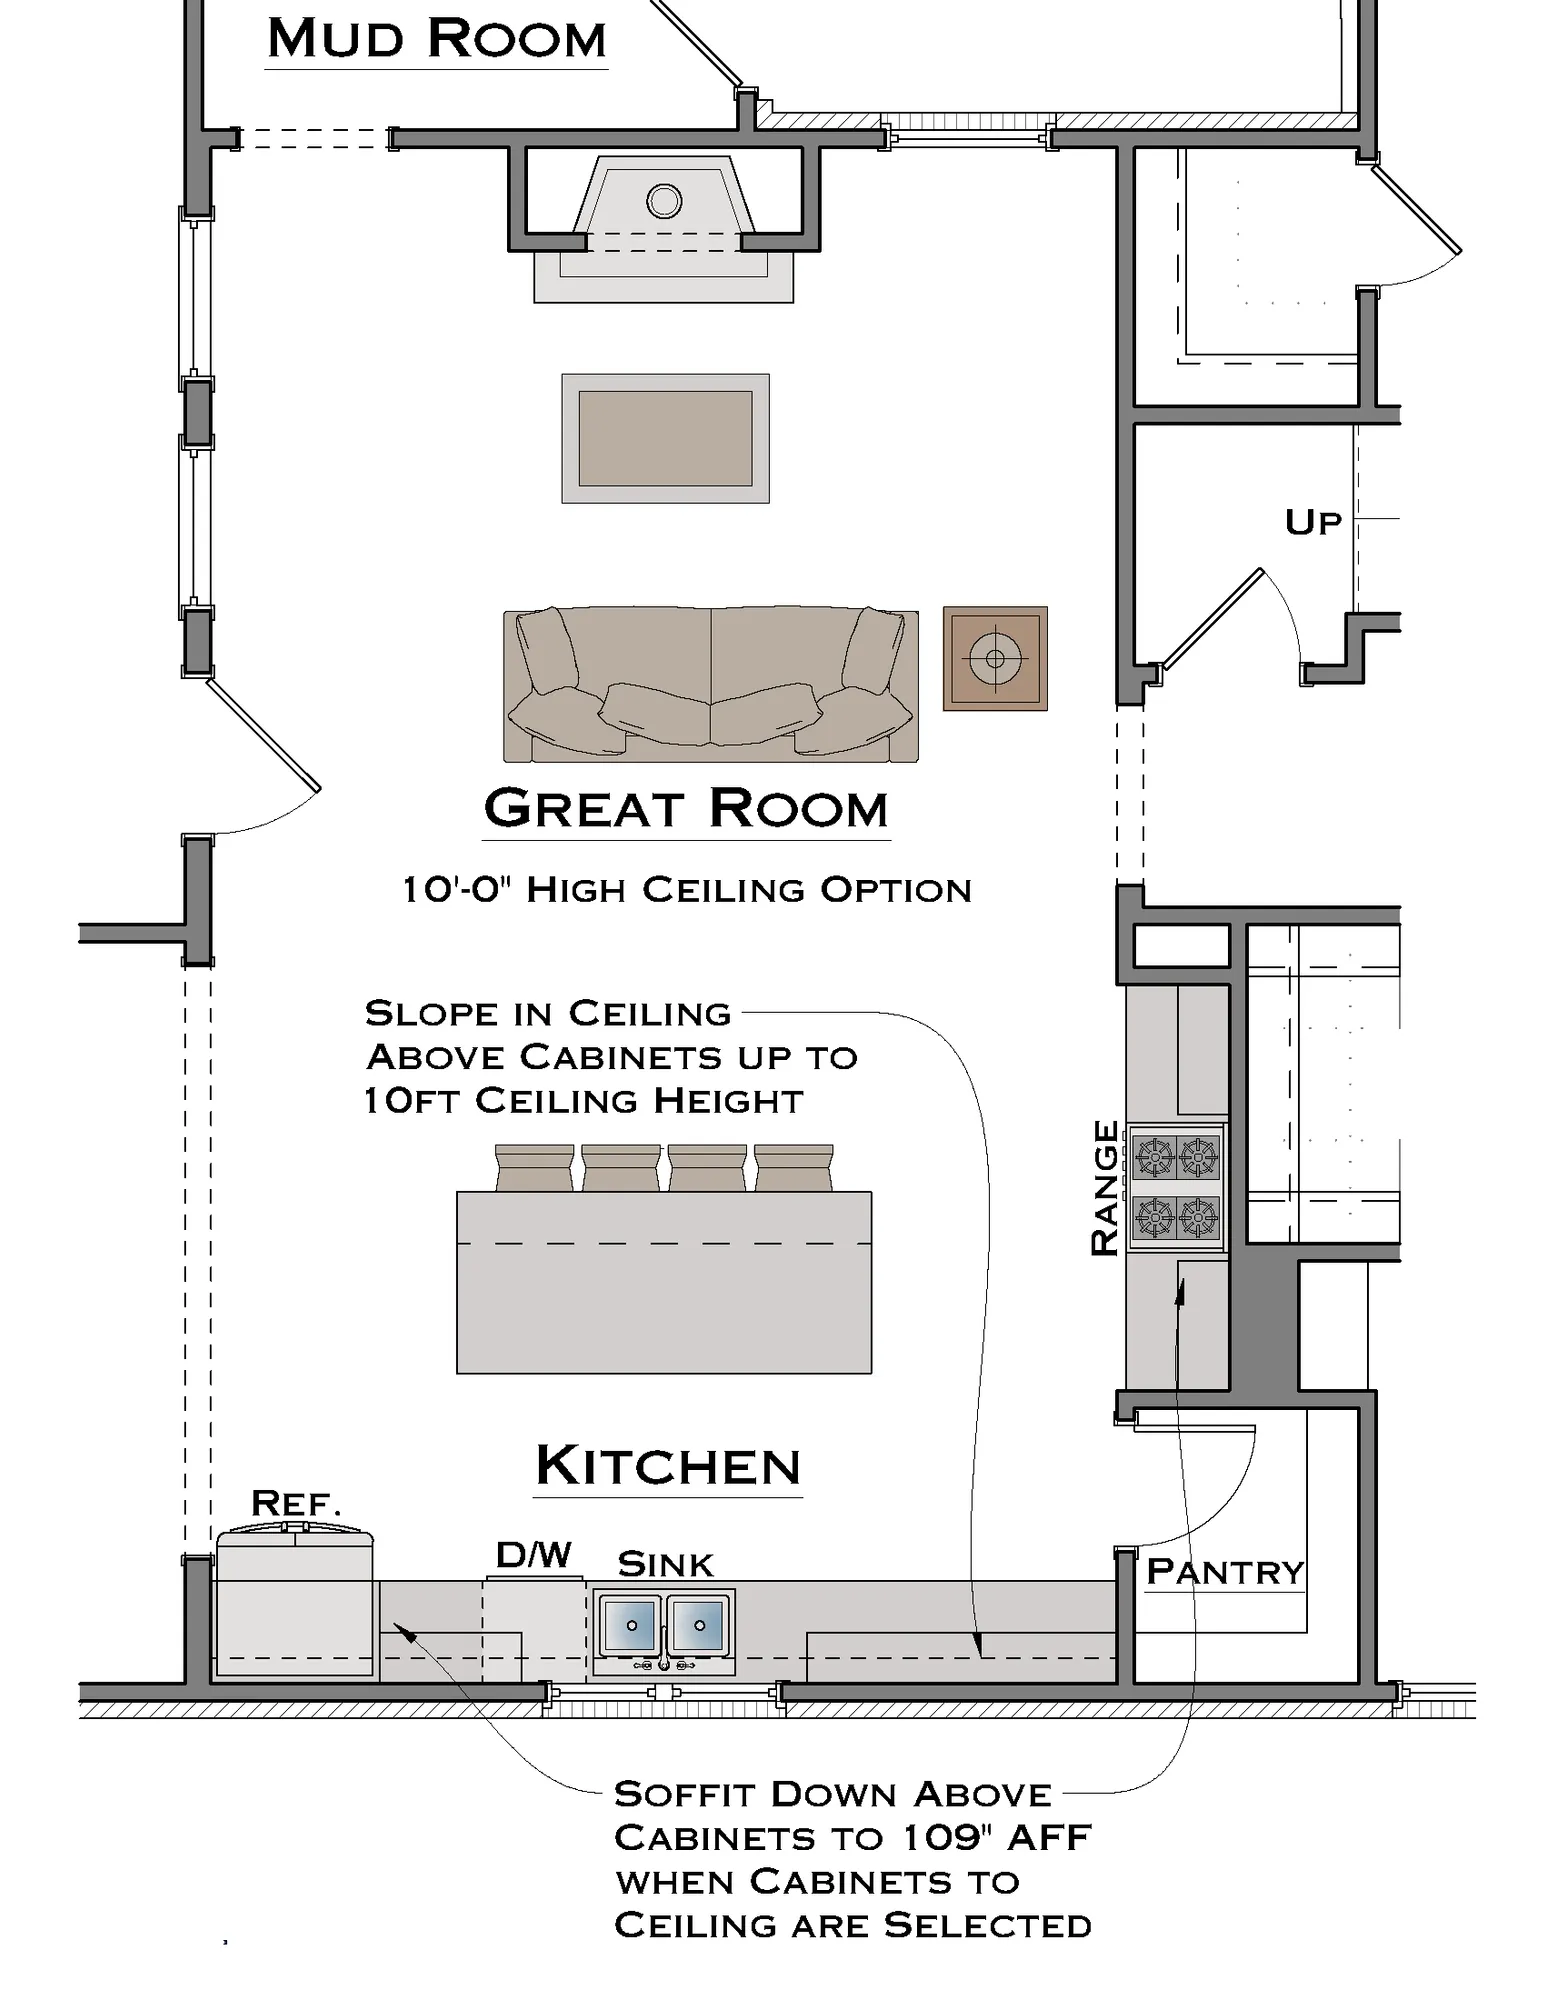 Kitchen & Great Room 10ft Ceiling Height Option - undefined